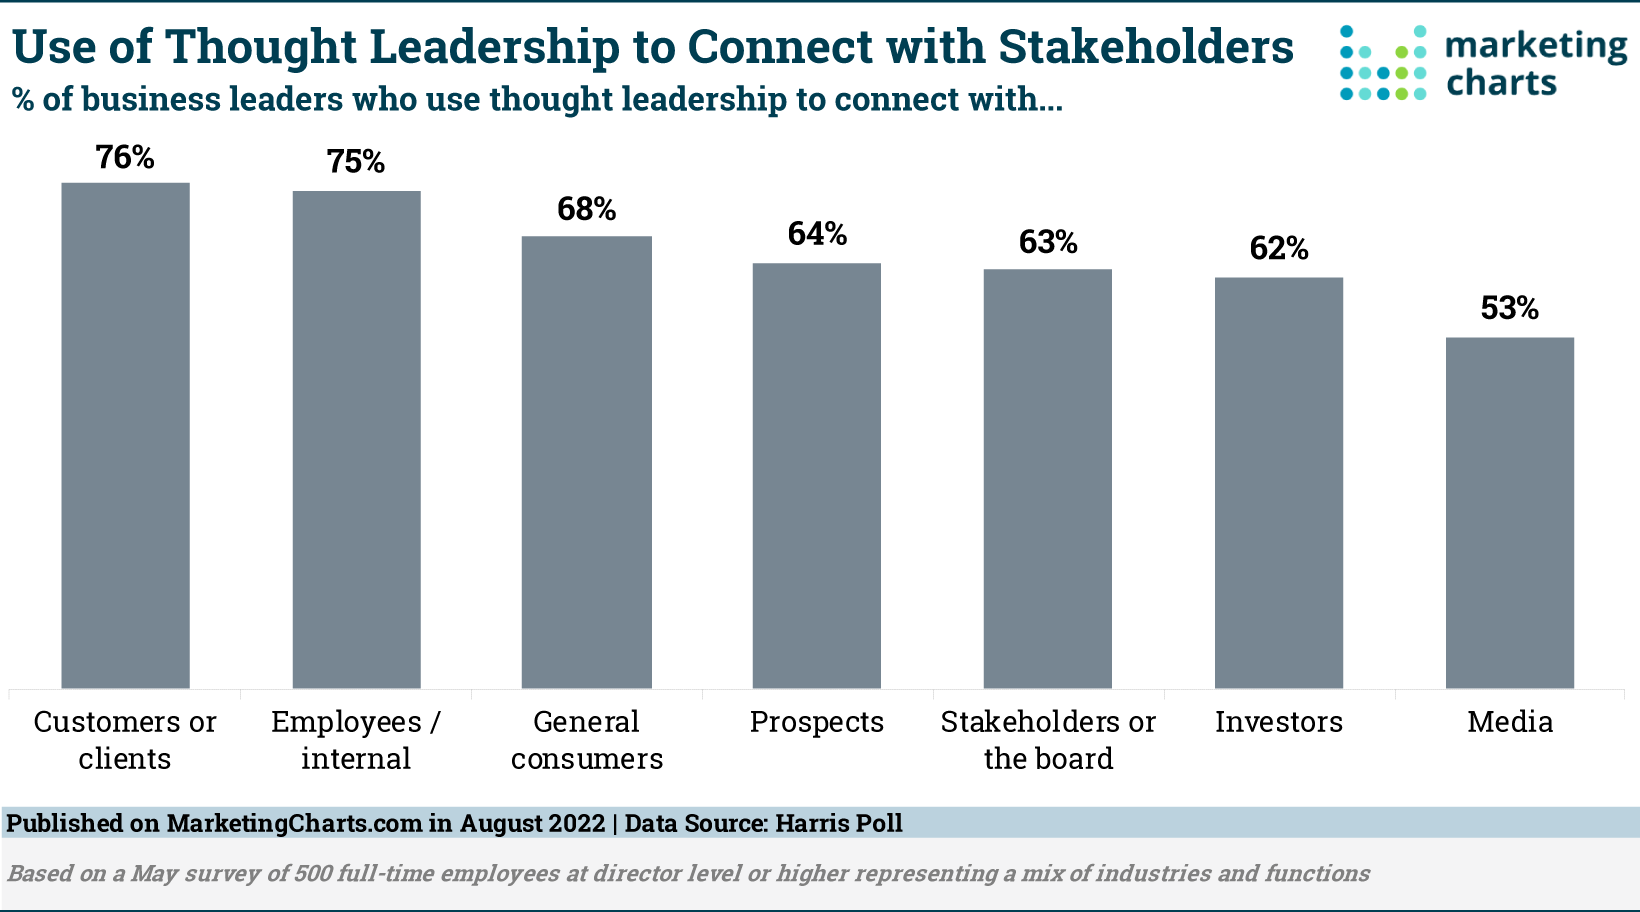 Graph shows all of the audiences brands connect with using thought leadership, including customers or clients, employees, investors, media, and the general public.